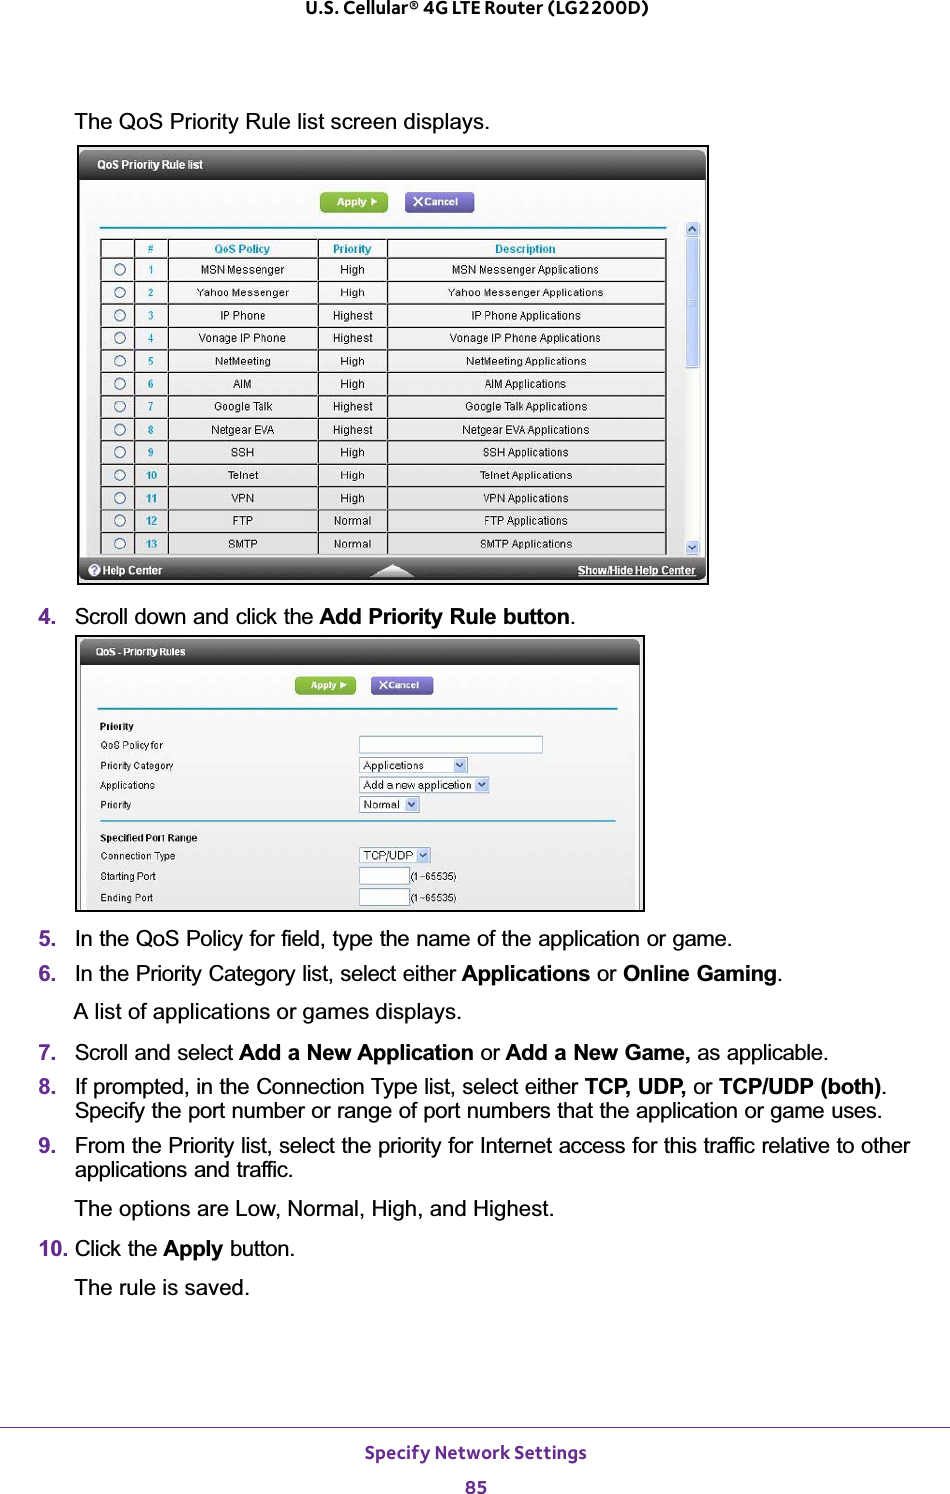 Specify Network Settings85 U.S. Cellular® 4G LTE Router (LG2200D)The QoS Priority Rule list screen displays. 4. Scroll down and click the Add Priority Rule button.5. In the QoS Policy for field, type the name of the application or game.6. In the Priority Category list, select either Applications or Online Gaming.A list of applications or games displays.7. Scroll and select Add a New Application or Add a New Game, as applicable. 8. If prompted, in the Connection Type list, select either TCP, UDP, or TCP/UDP (both).Specify the port number or range of port numbers that the application or game uses.9. From the Priority list, select the priority for Internet access for this traffic relative to other applications and traffic. The options are Low, Normal, High, and Highest.10. Click the Apply button.The rule is saved.